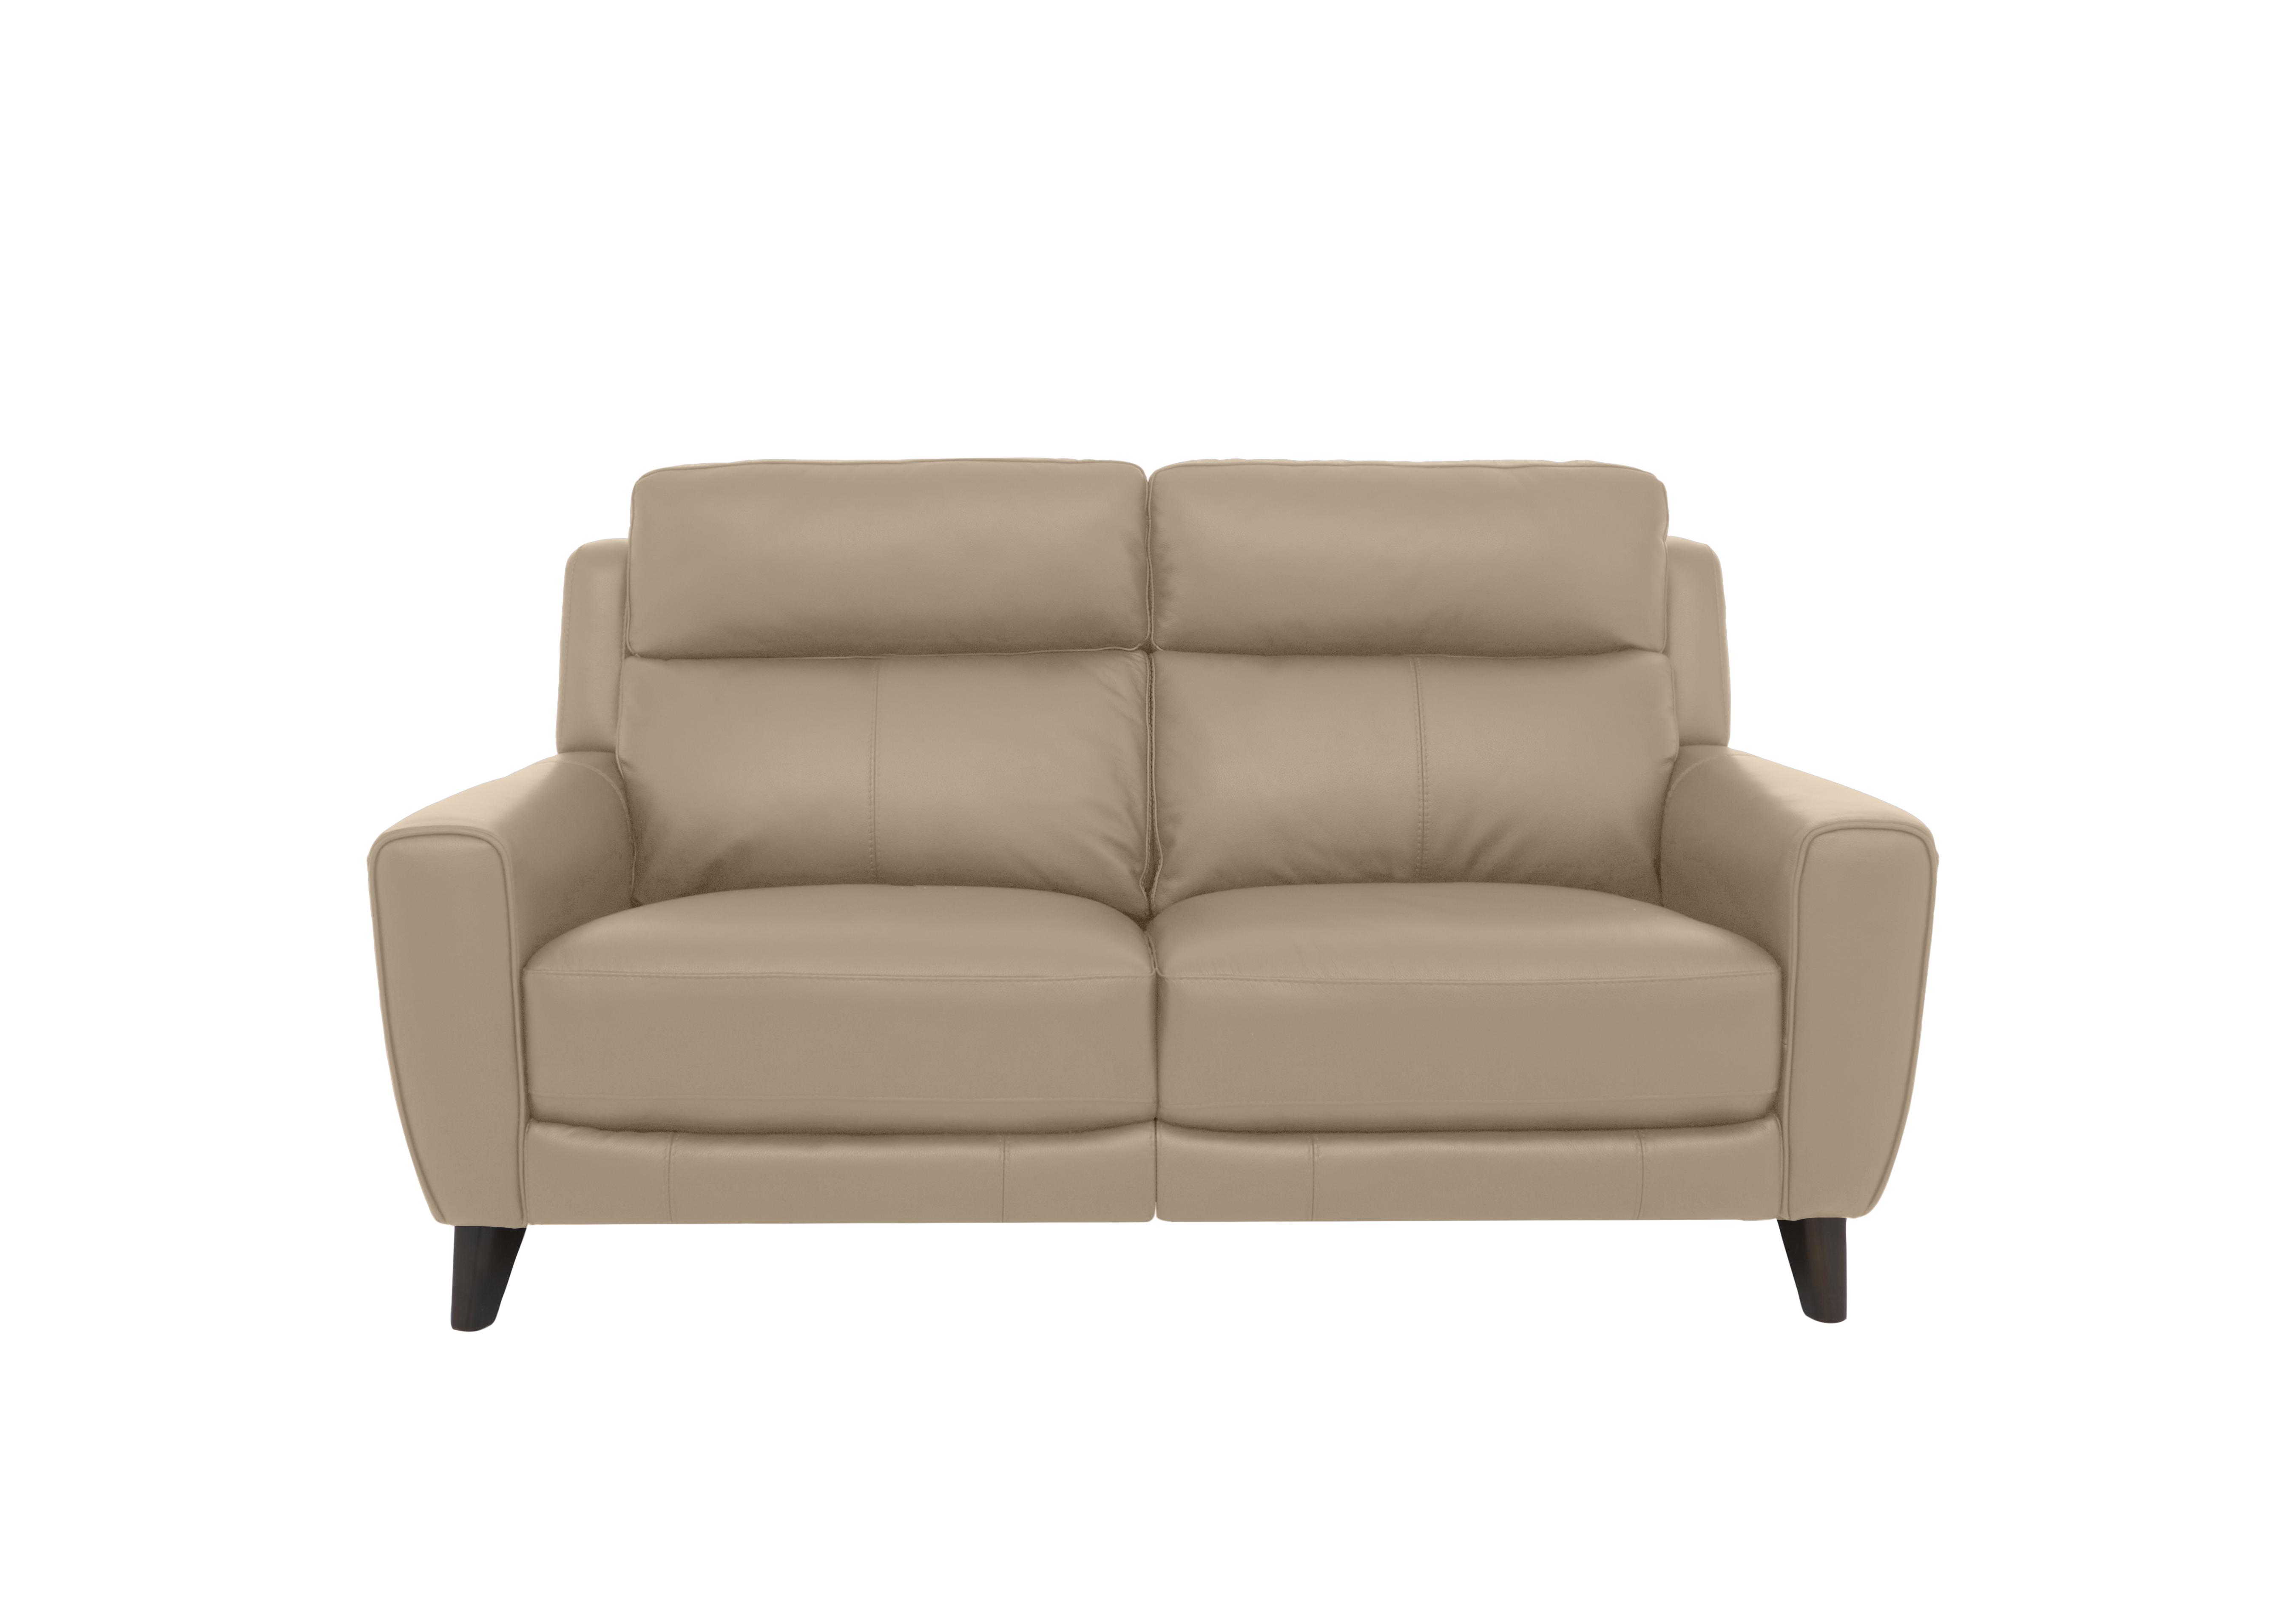 Zen 2 Seater Leather Power Recliner Sofa with Power Headrests and Power Lumbar in Bx-039c Pebble on Furniture Village